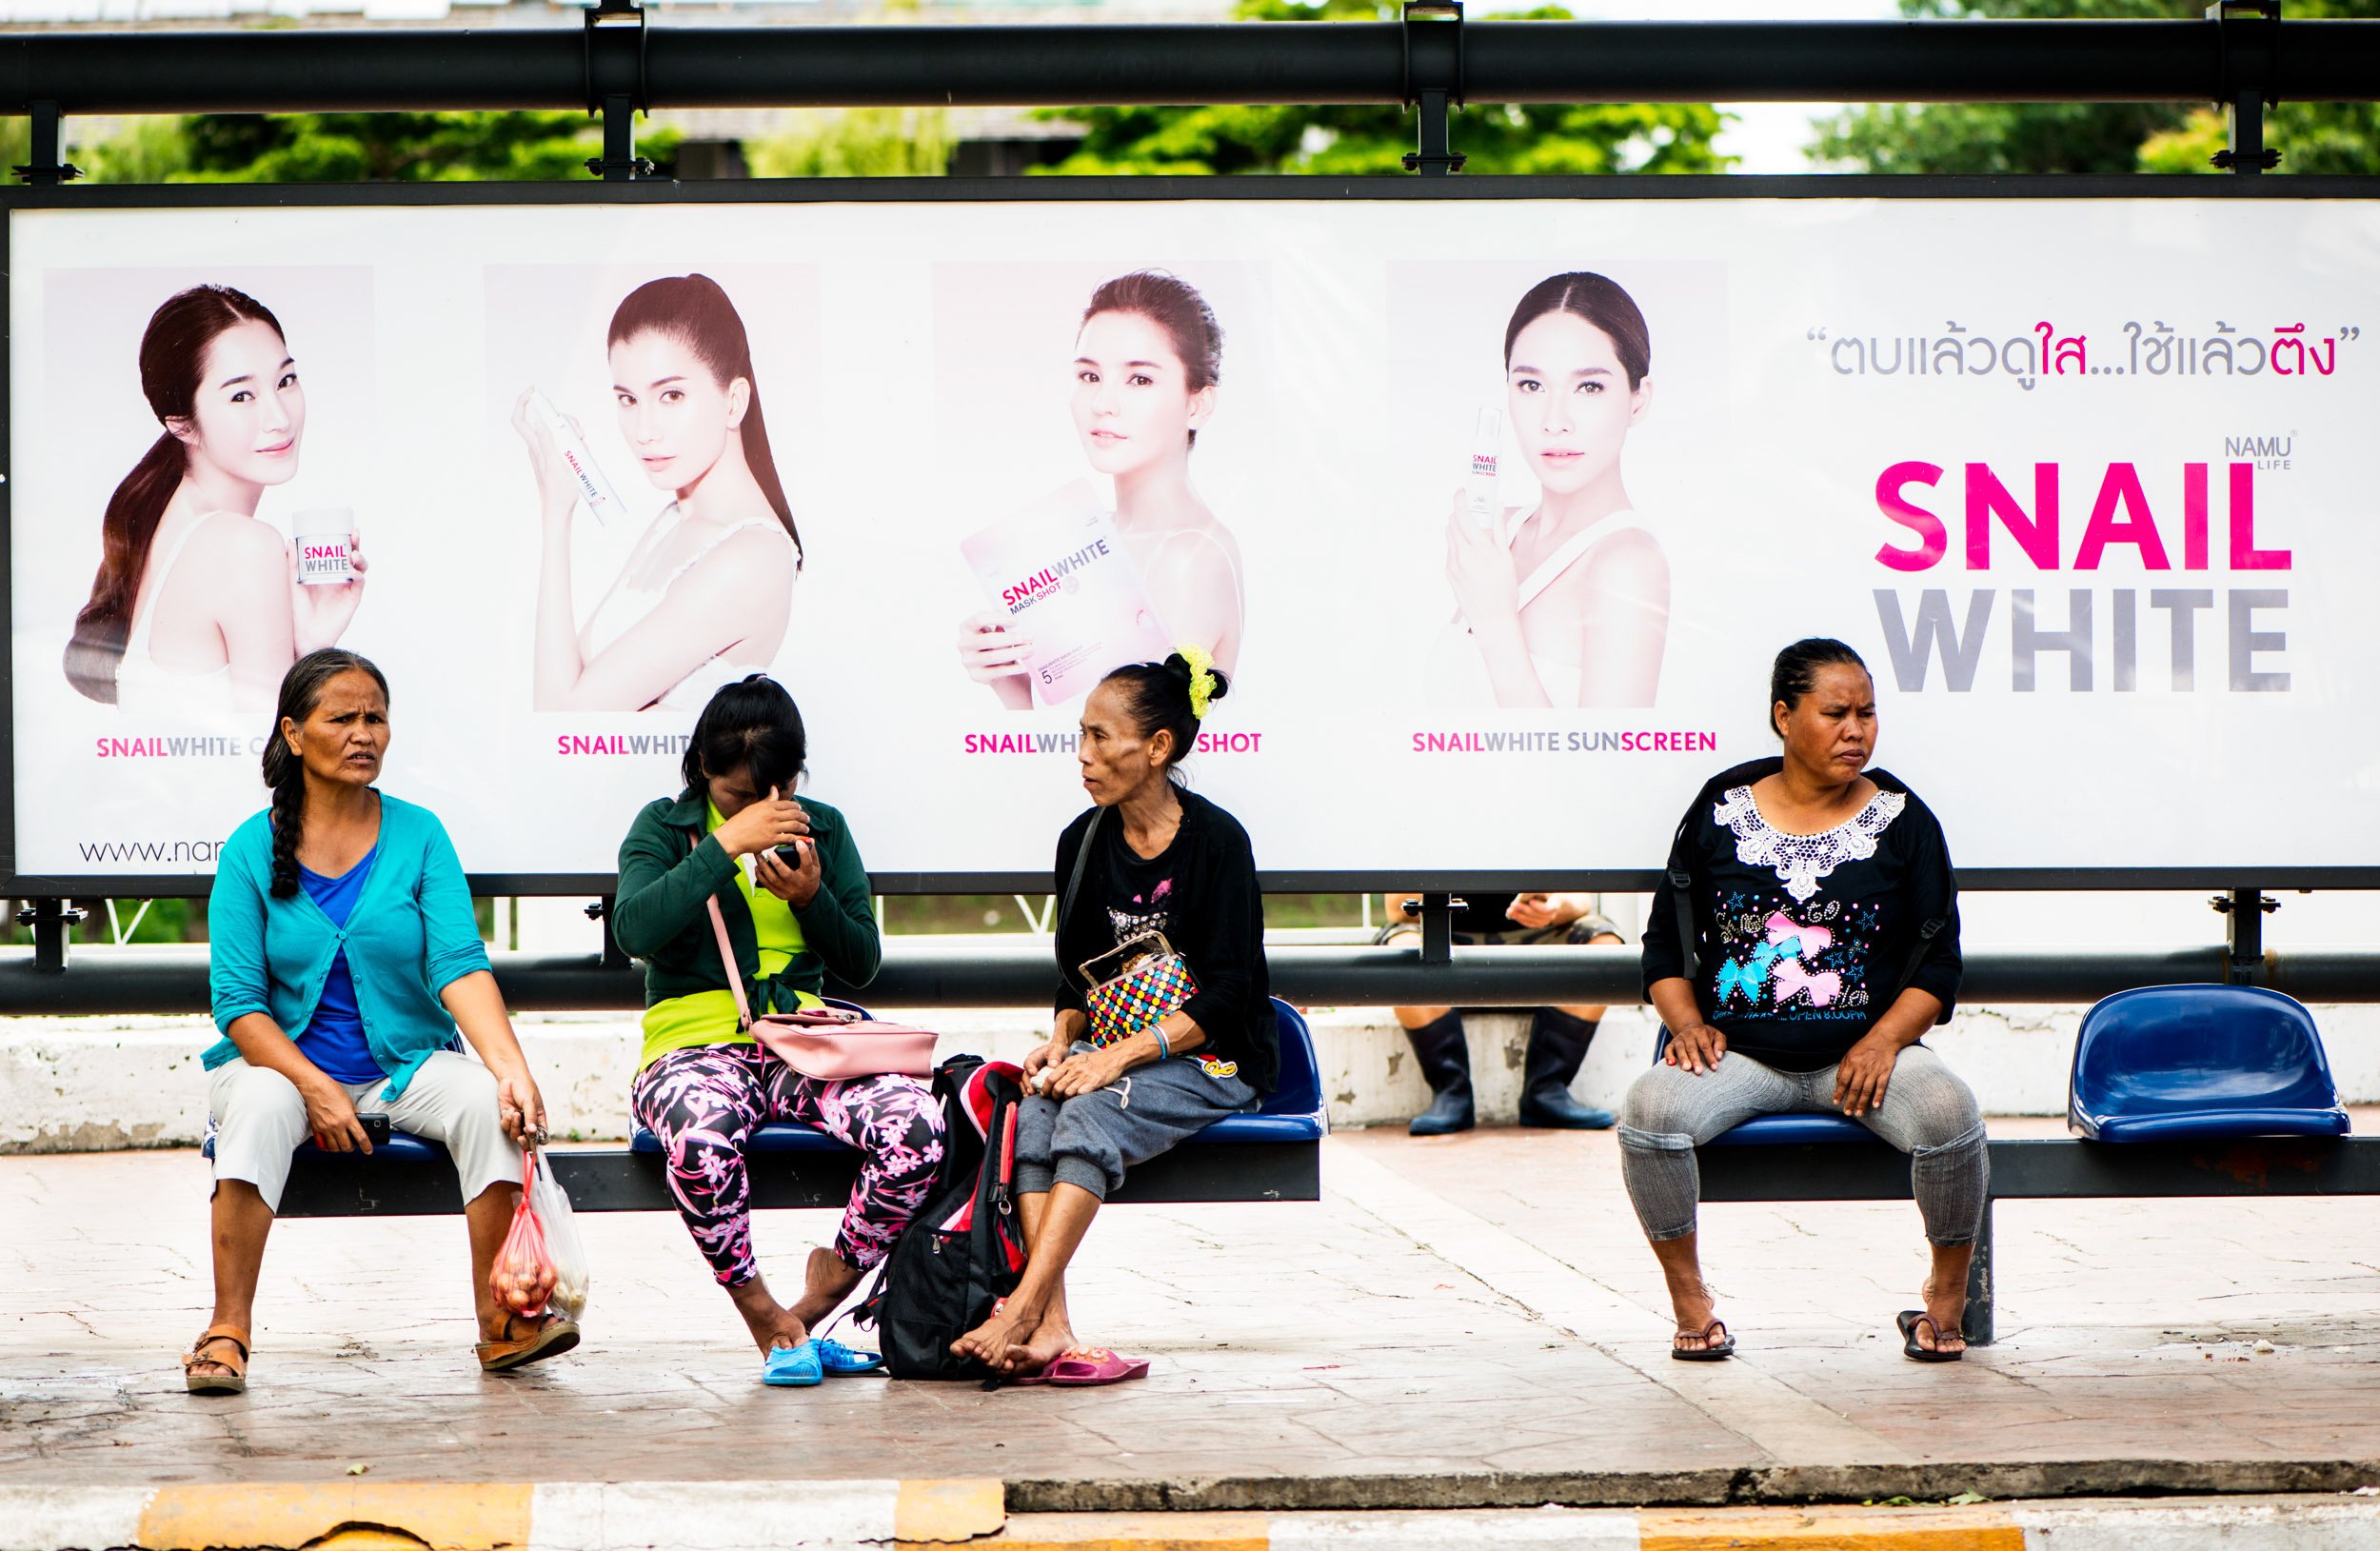 Women sitting at a bus stop with an advertisement for skin whitening © Kevin Landwer-Johan